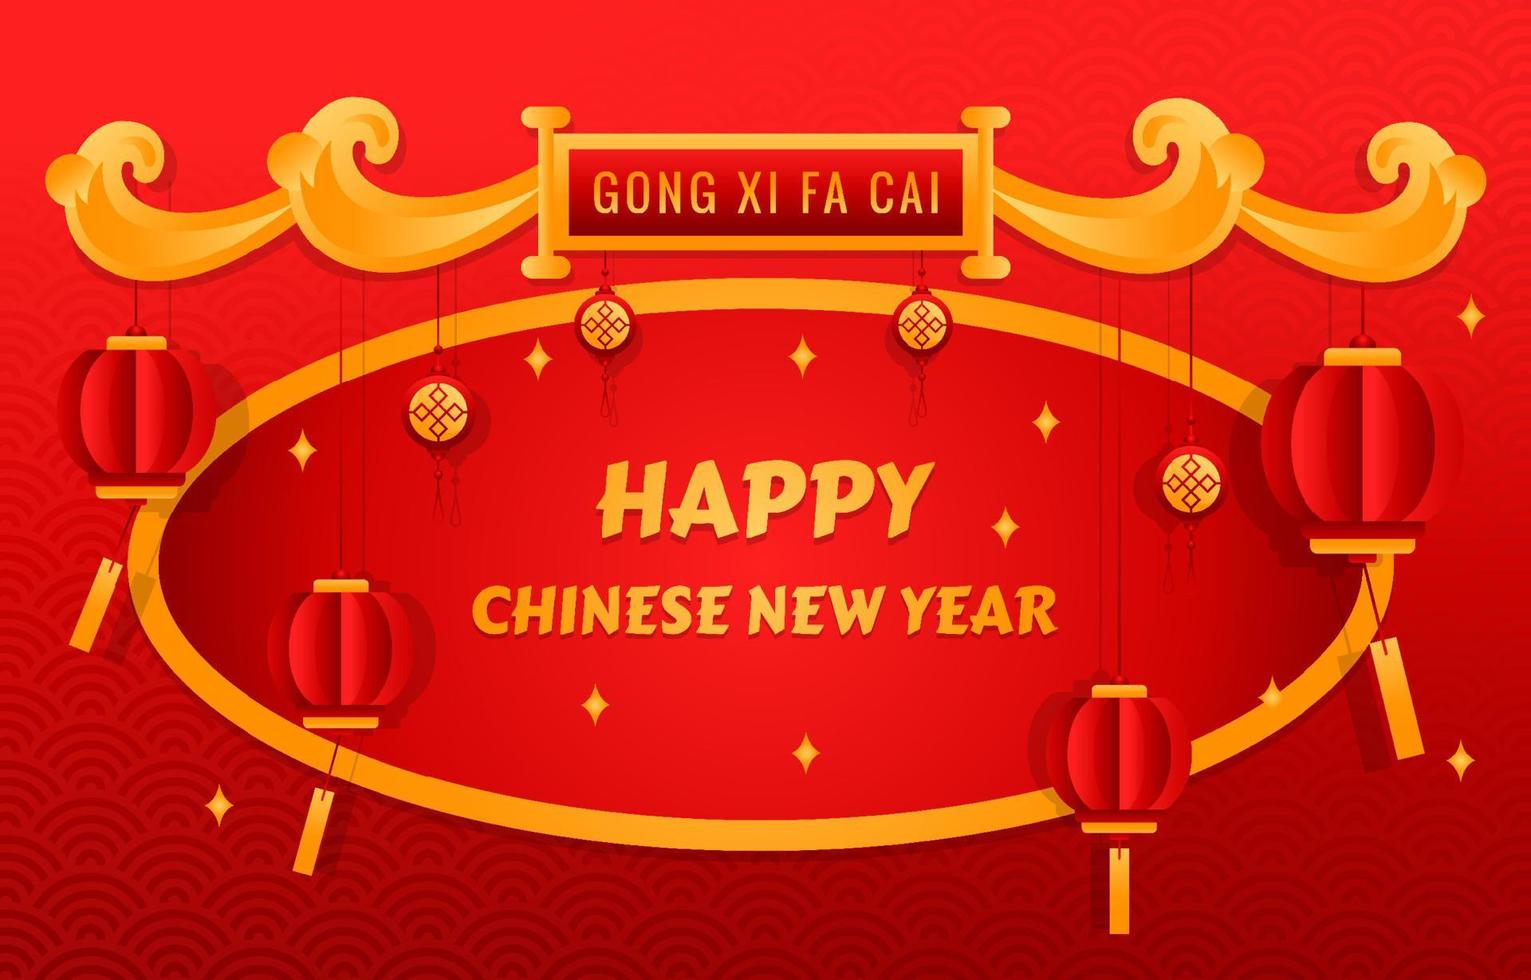 Chinese New Year Gong Xi Fa Cai Decorative Background vector